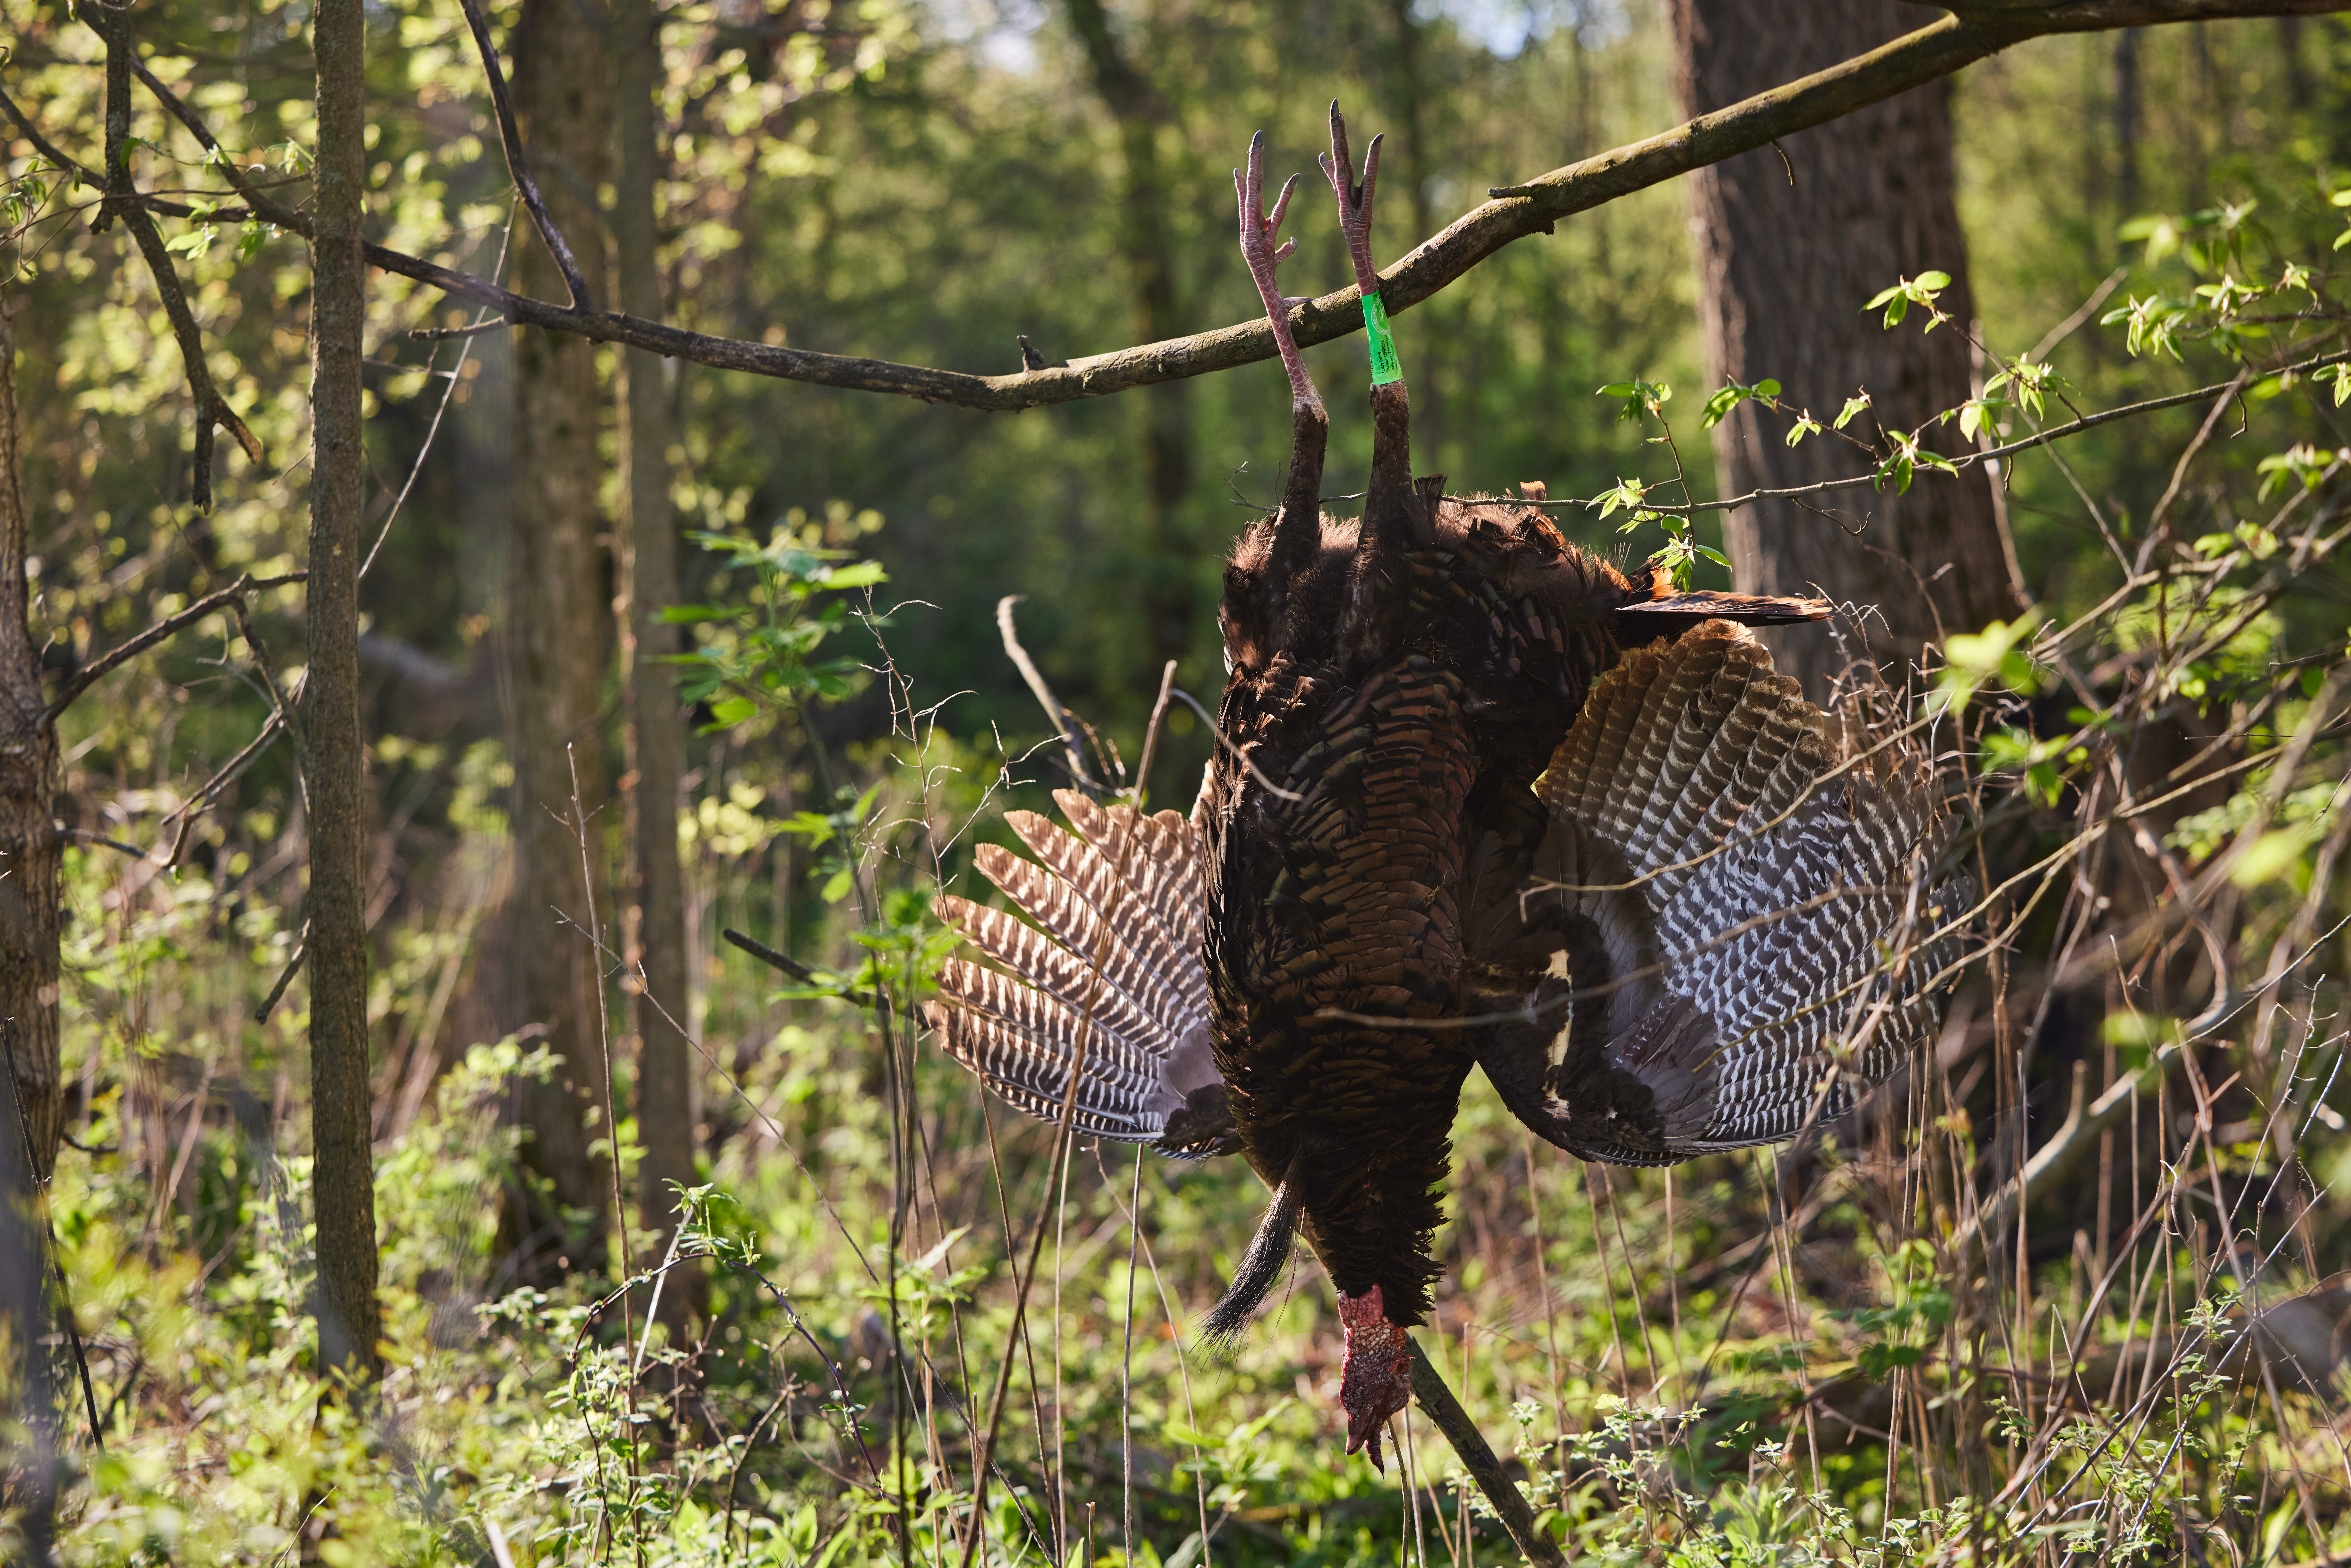 A turkey hangs from a branch after a hunt, wild game recipes concept. 